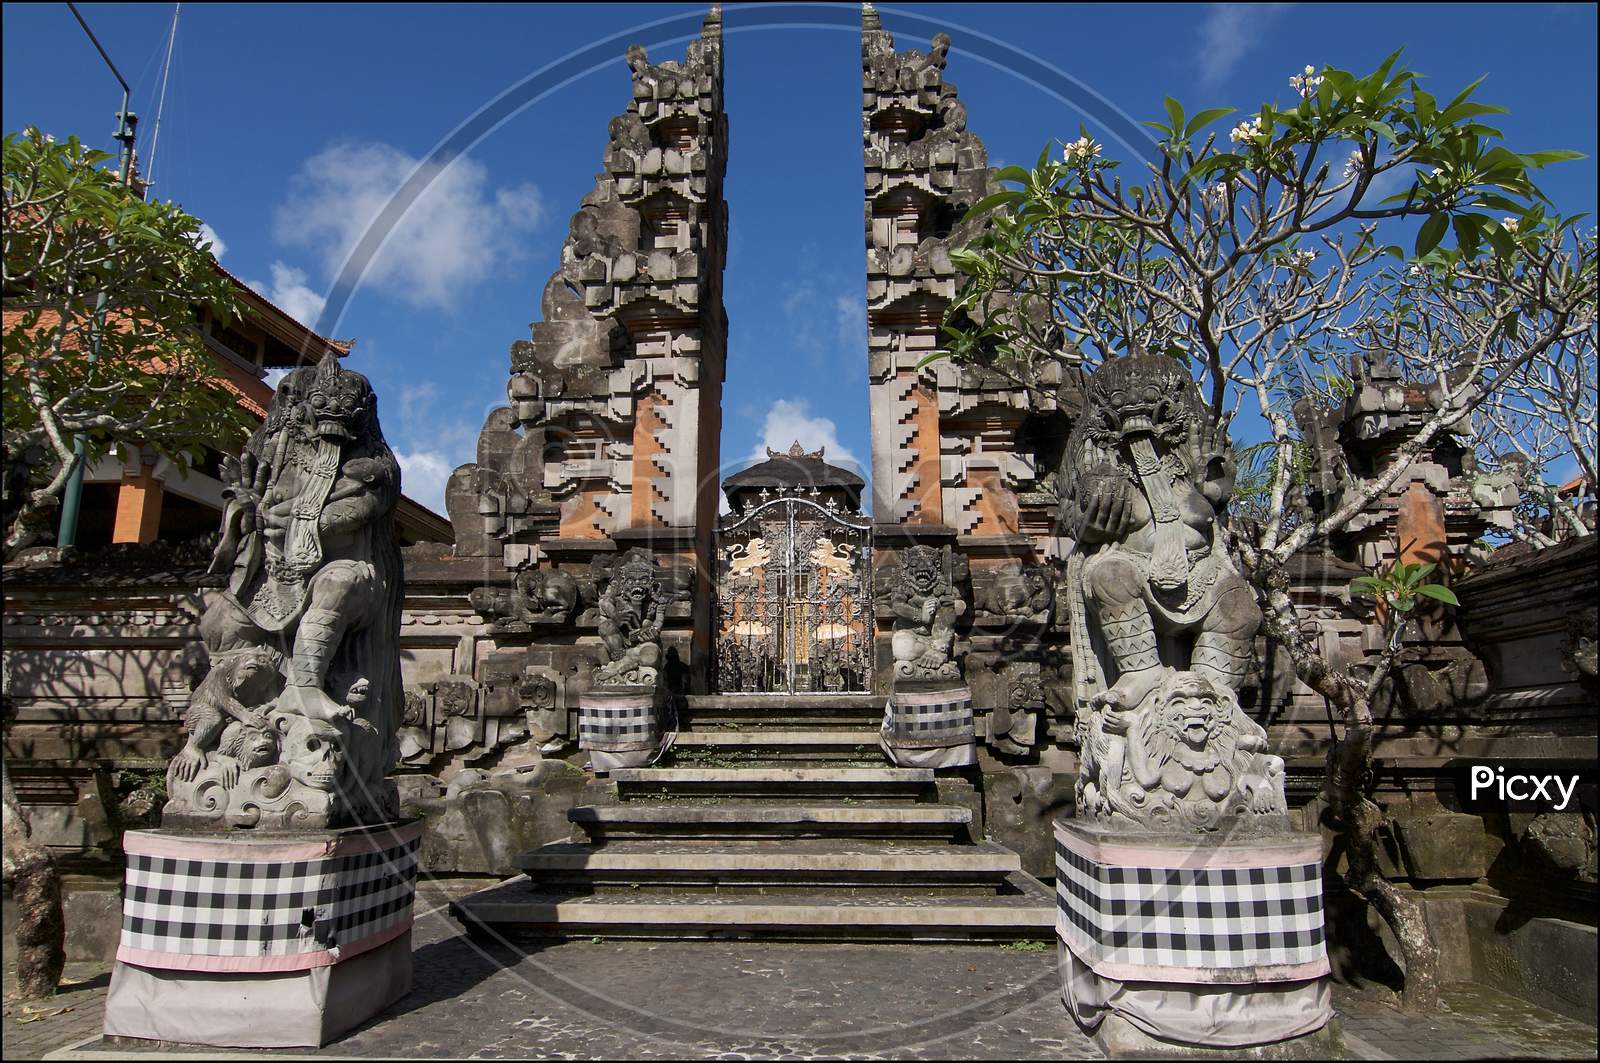 Typical Balinese Temple Building